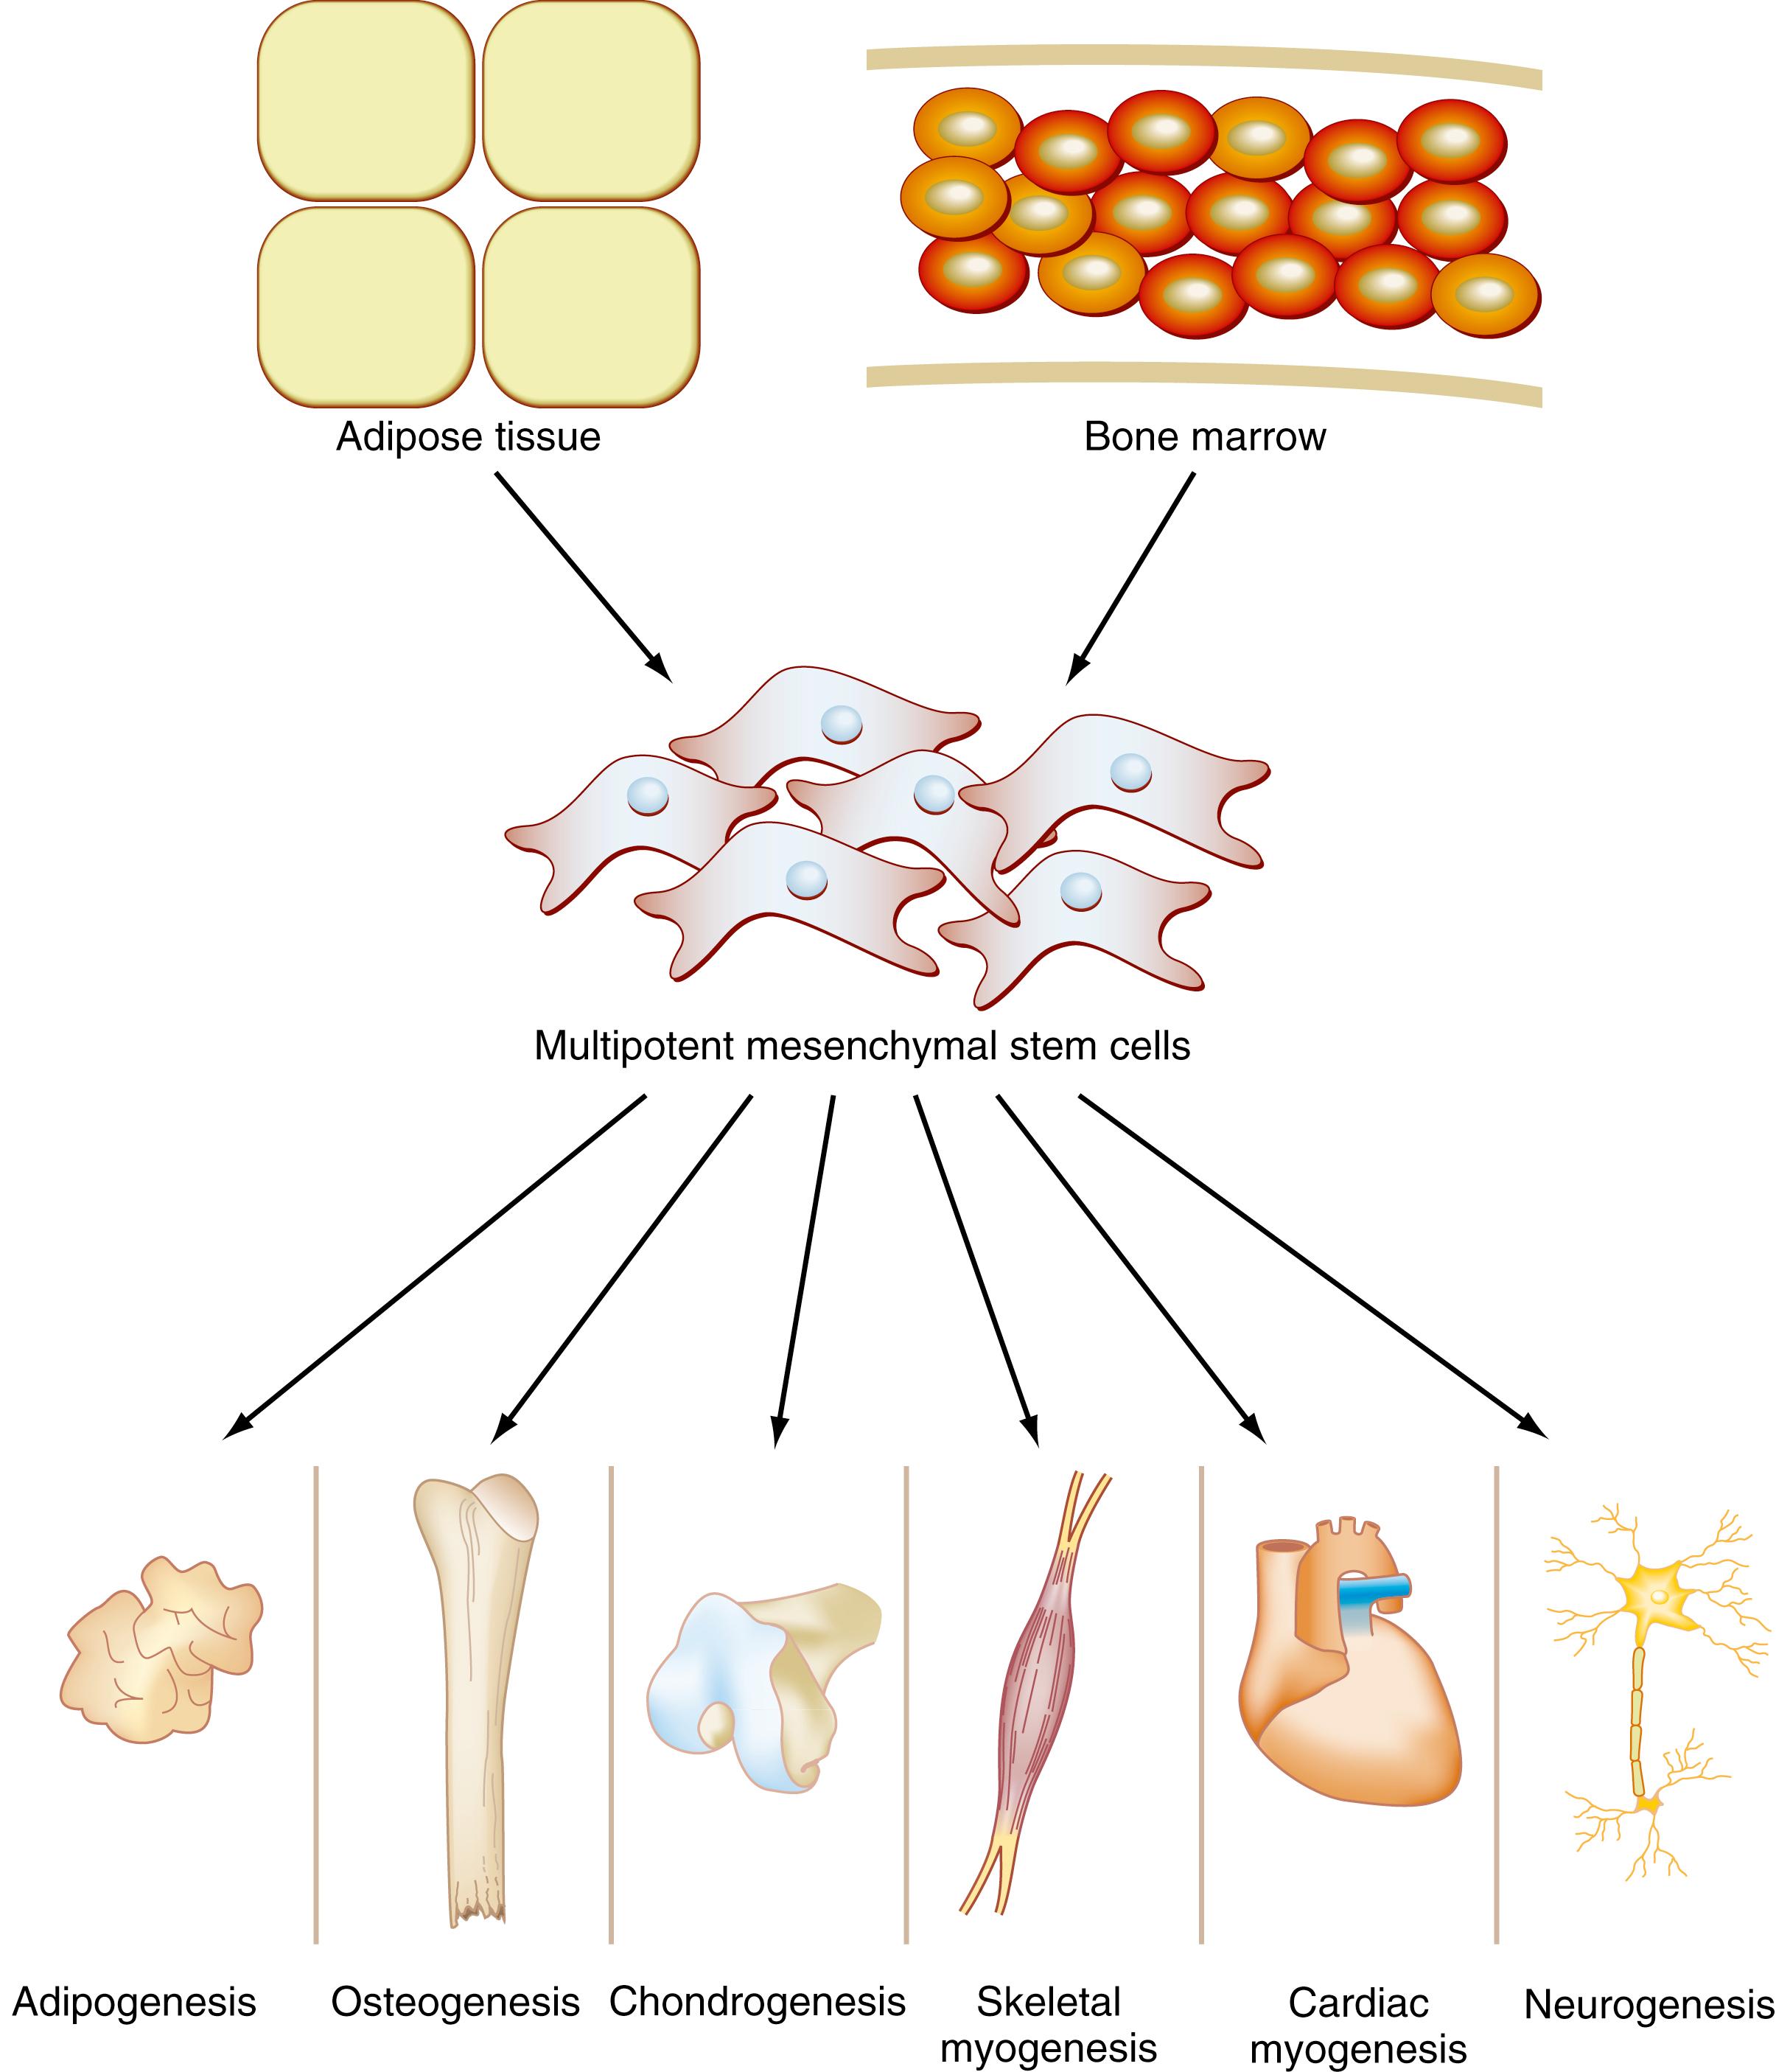 Fig. 7.2, Adult multipotent mesenchymal stem cells (MSCs) can be isolated from adipose tissue (adipose stem cells [ASCs]) or from bone marrow (MSCs). These cells have been shown to differentiate into multiple tissue types in vitro, including adipose (adipogenesis), bone (osteogenesis), cartilage (chondrogenesis), skeletal and cardiac muscle (skeletal and cardiac myogenesis), and nerve (neurogenesis) tissues. There has been varying success in experimentally differentiating these cells into these tissue types in vivo, a necessary step before adult multipotent stem cells can be used clinically for regenerative medicine applications.